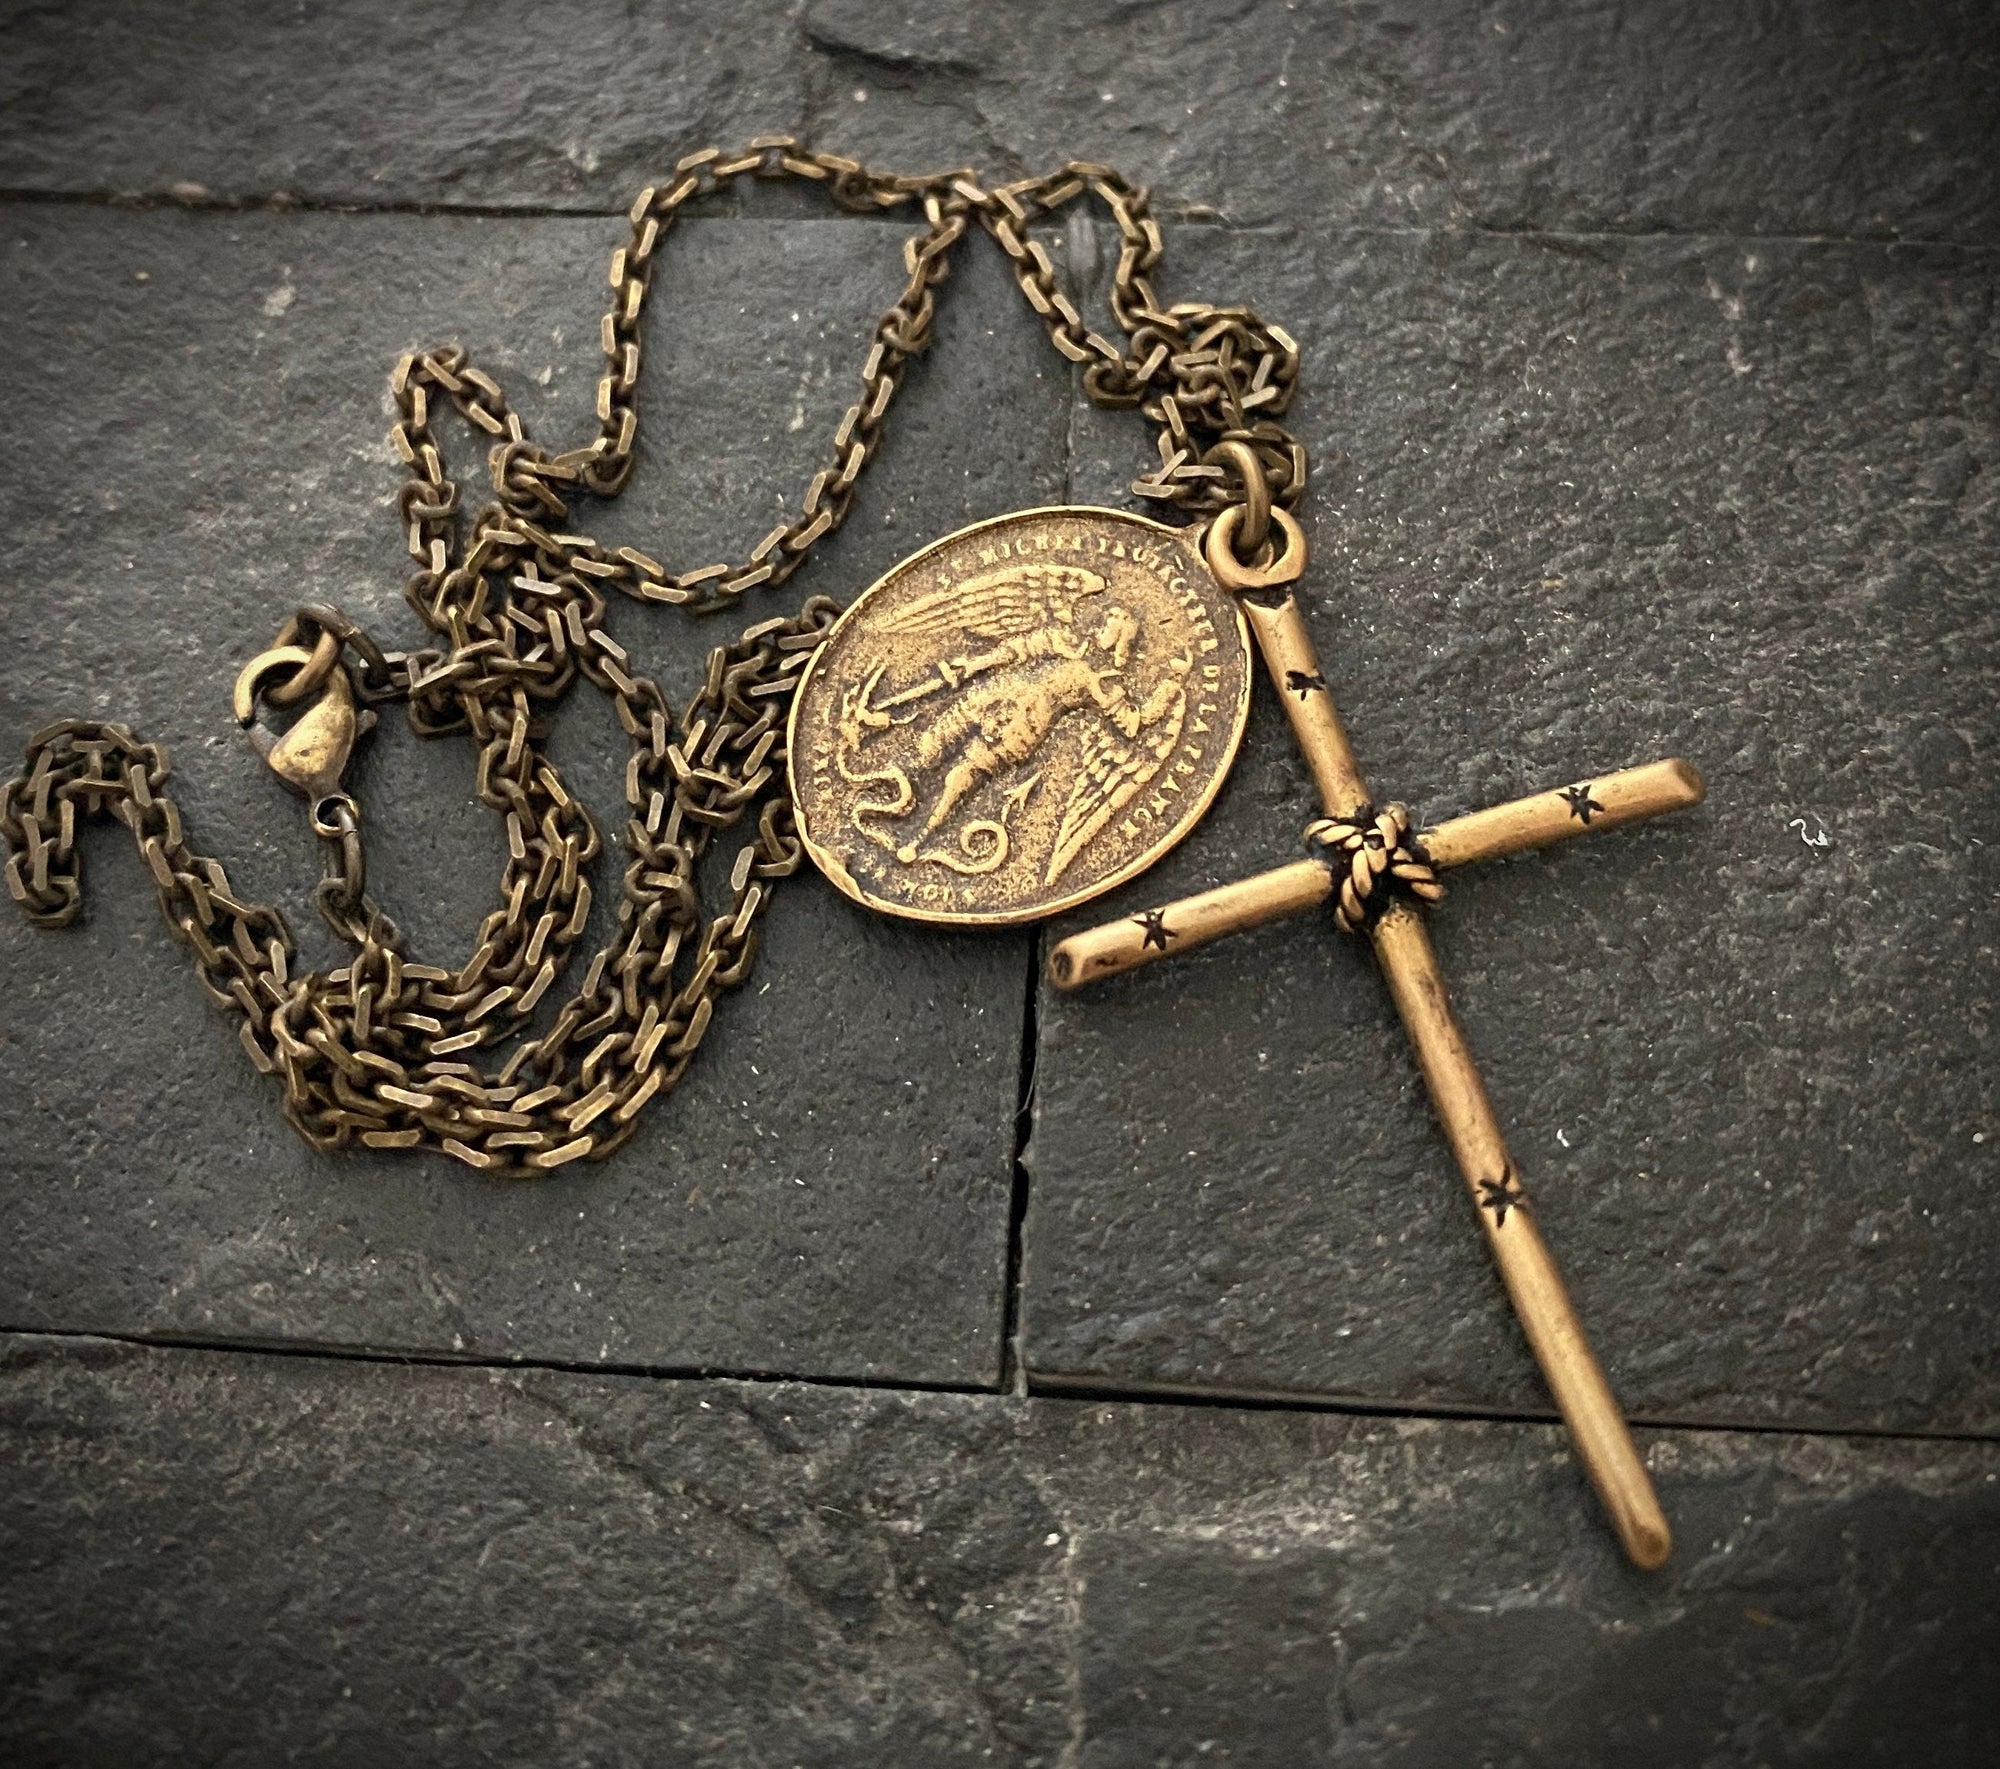 Men's Antiqued Brass Dual Pendant Necklace with Rope Tied Cross and Archangel St. Michael Medal, Unisex Necklace, BR-036, Johnny Ltd